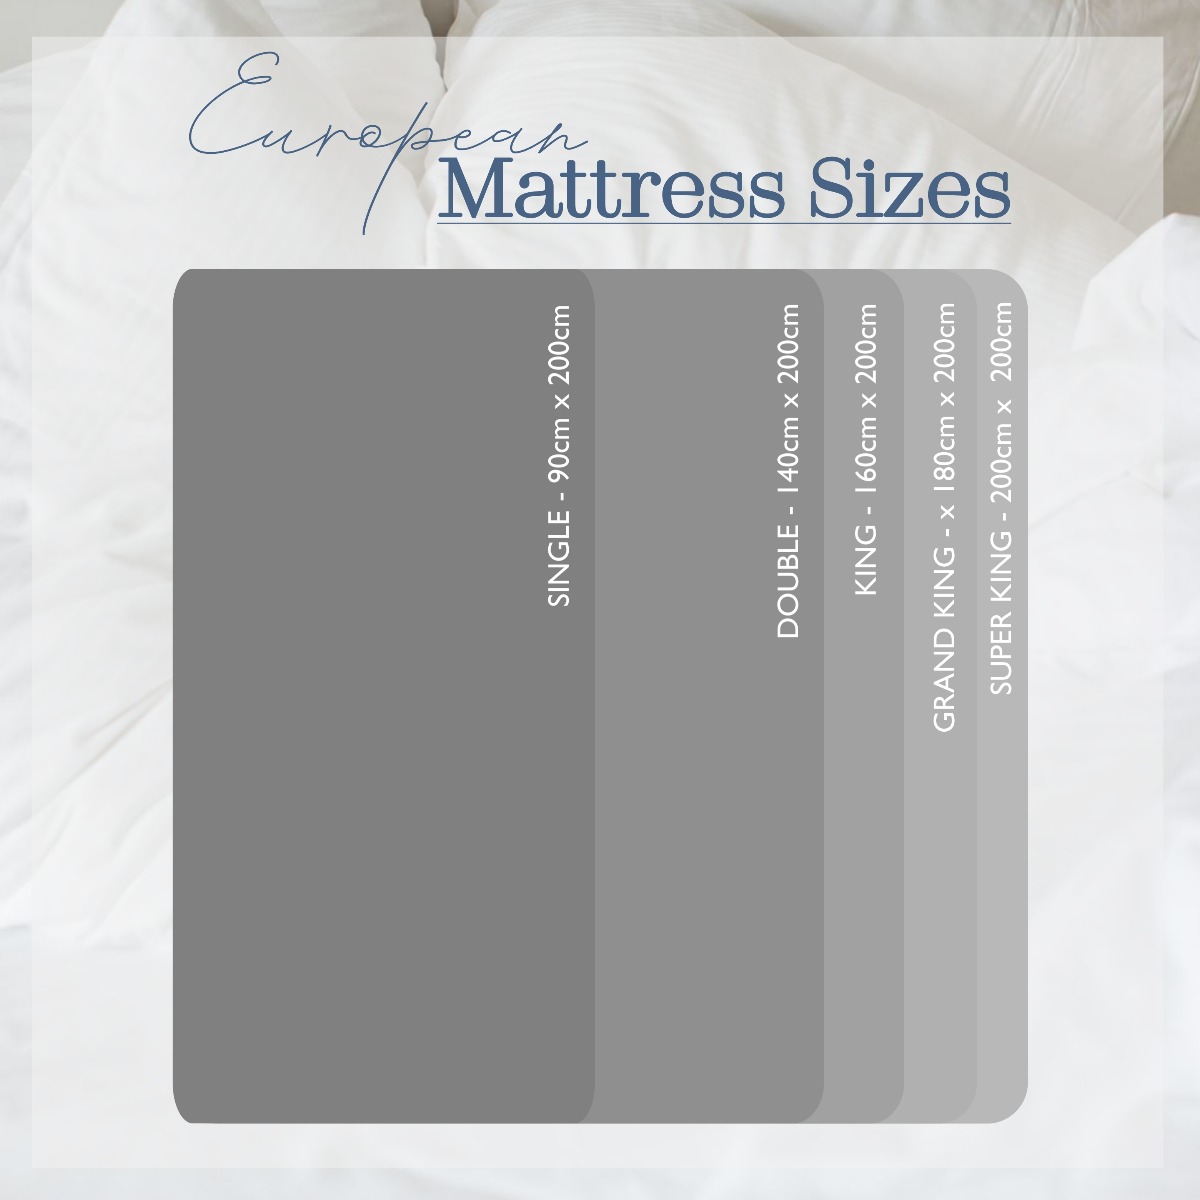 Your Guide To Uk Mattress Sizes The, Is There A Bed Size Bigger Than Super King